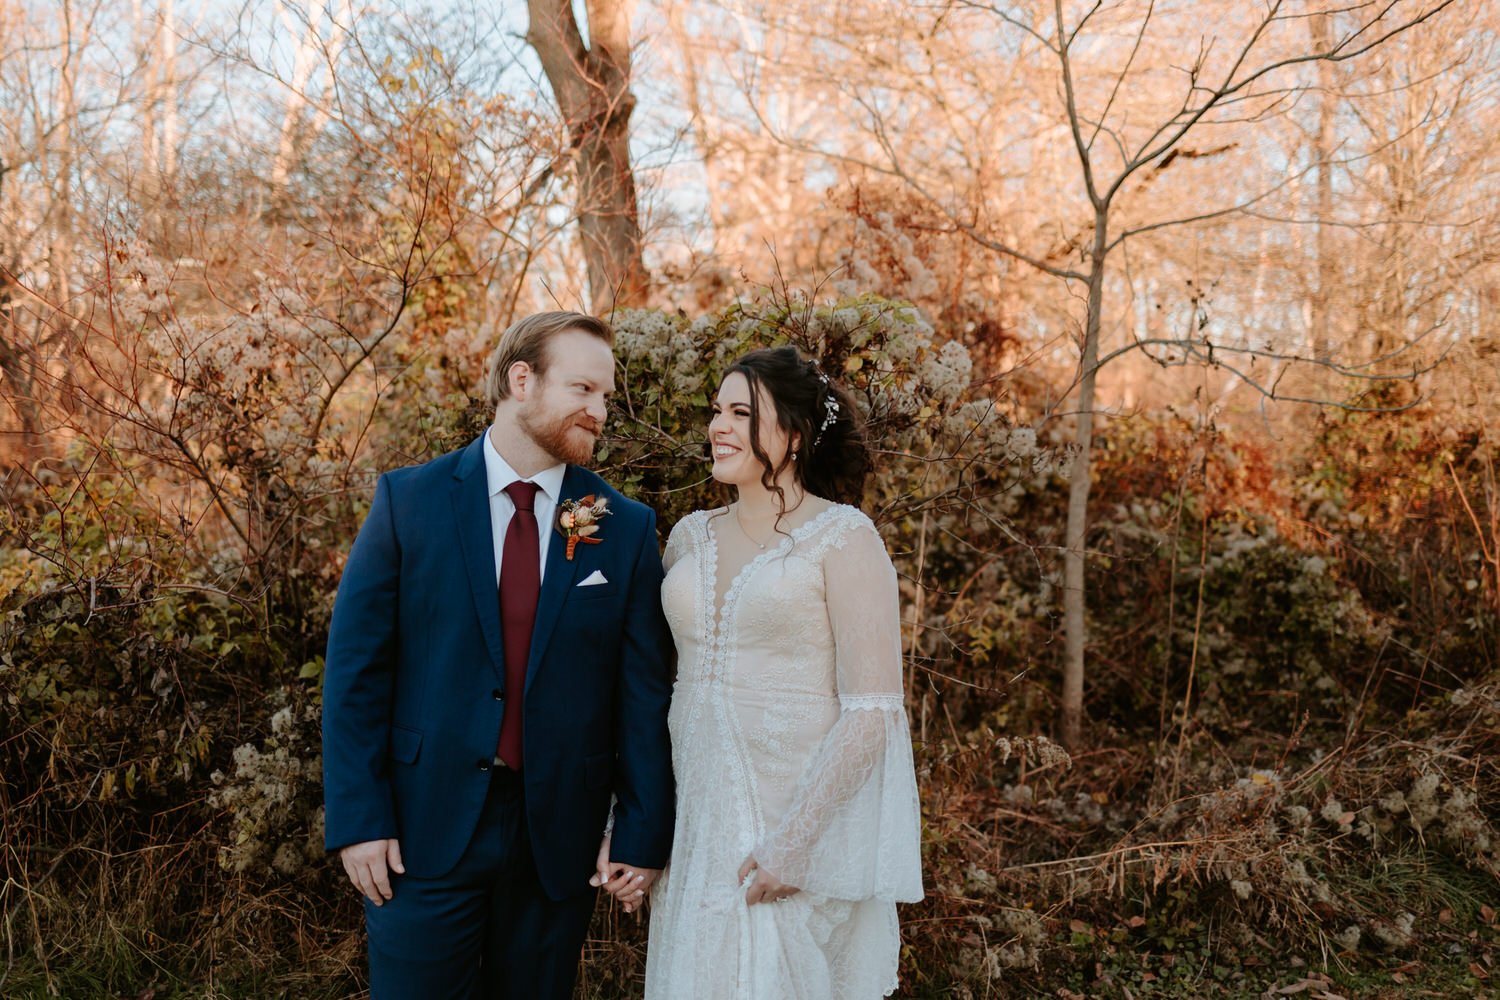 Bride and groom hold hands while smiling and standing in front of fall colored trees.